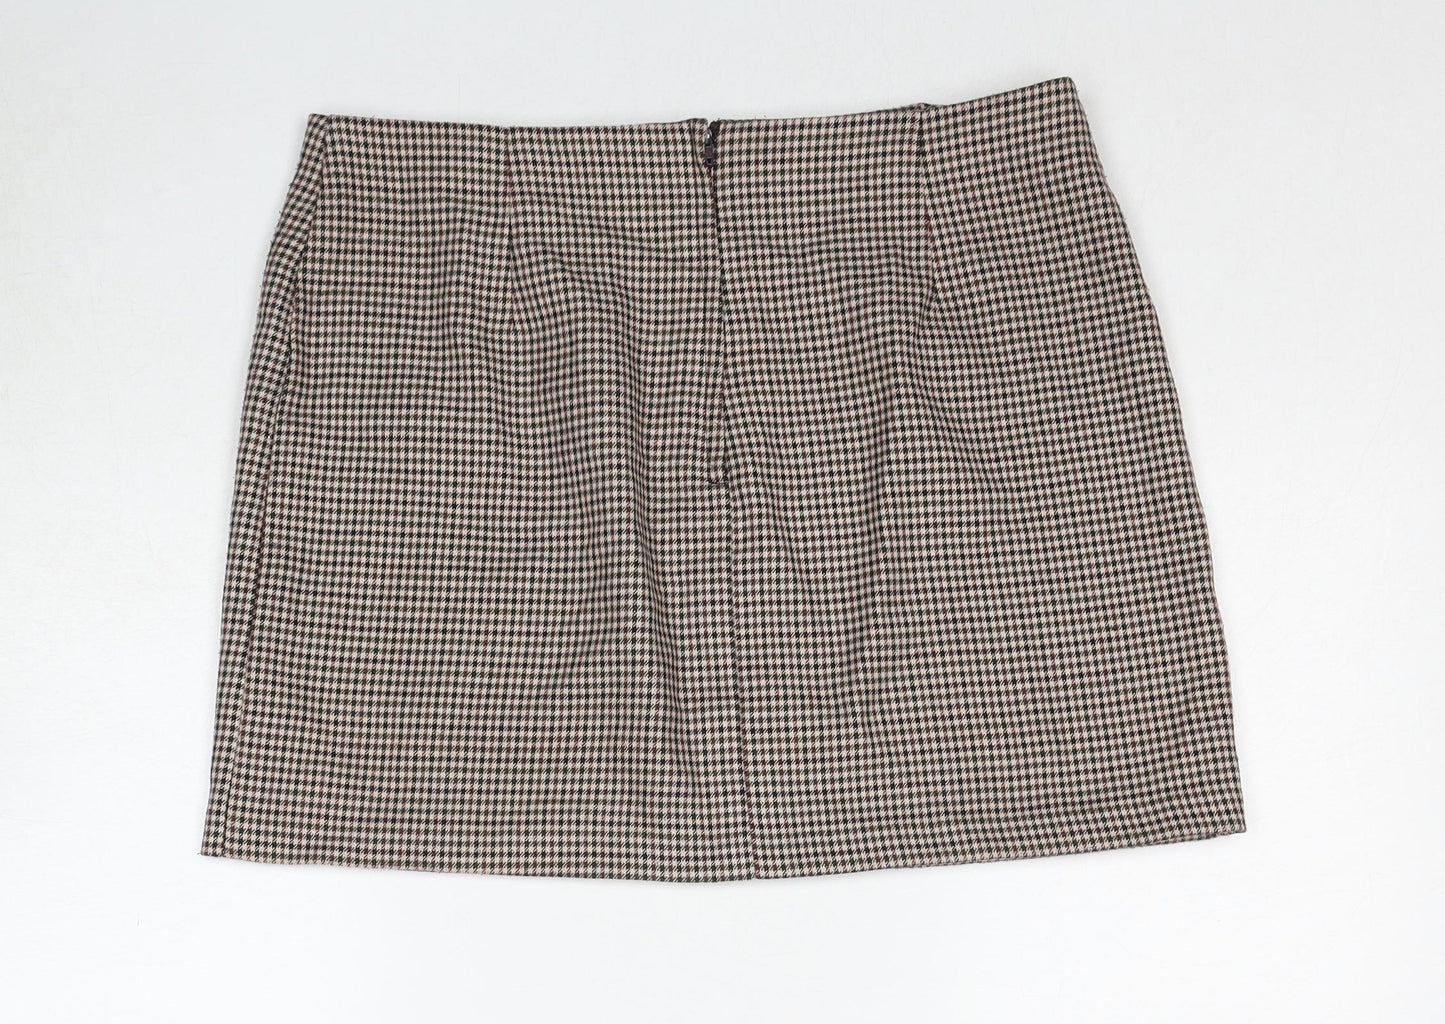 New Look Womens Beige Geometric Polyester A-Line Skirt Size 14 Zip - Houndstooth Pattern